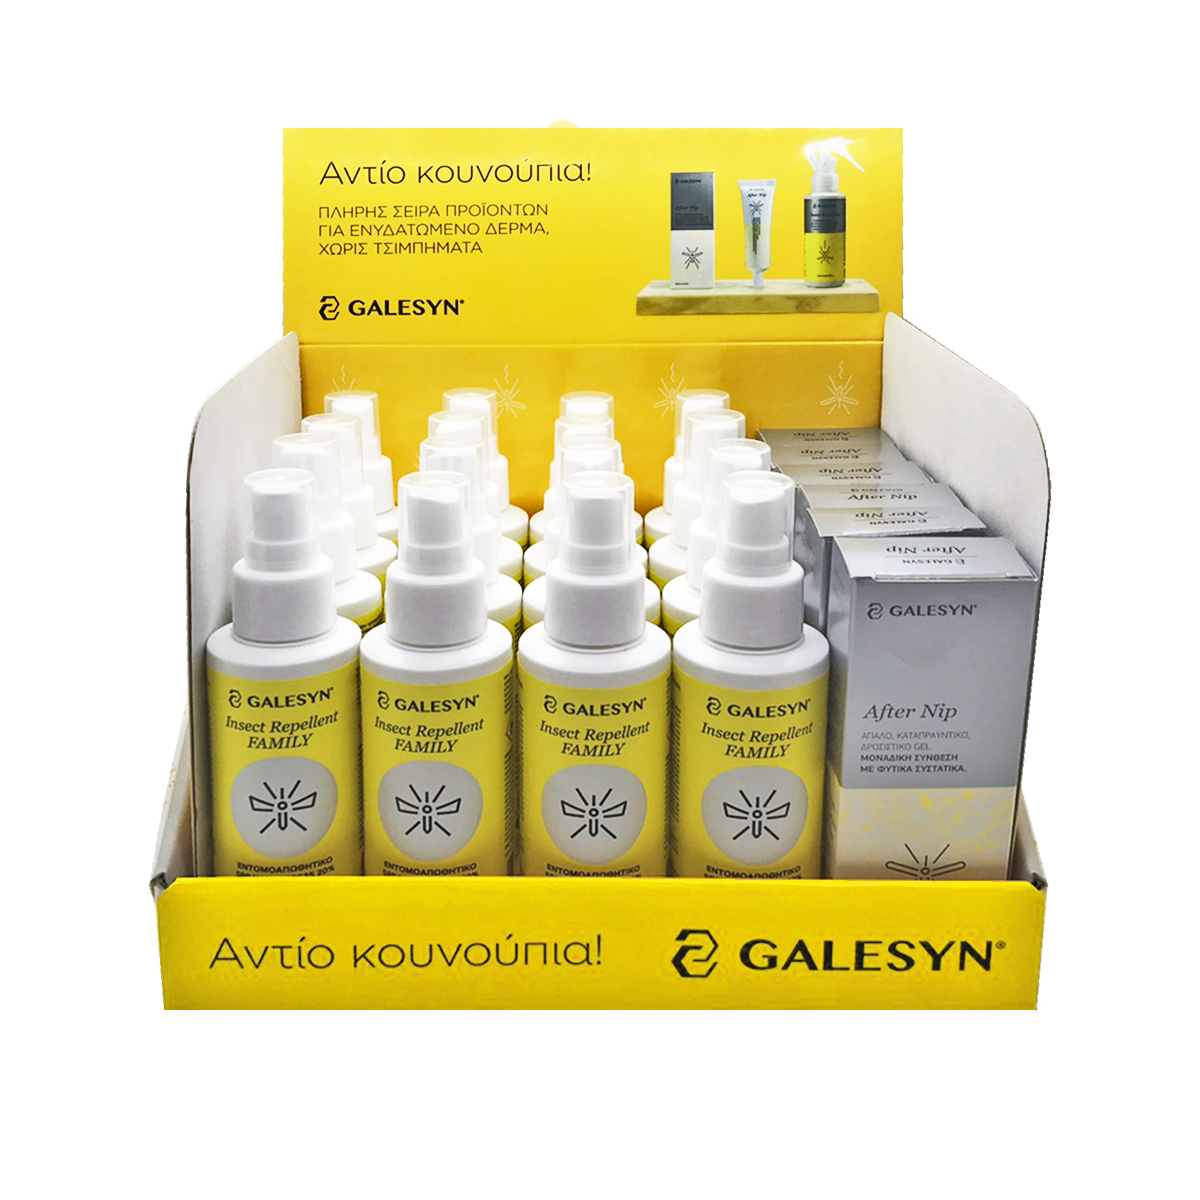 Galesyn Stand Mosquito Repellent (approx. 16pcs Insect Repellent Family IR3535 & 6pcs After Nip)